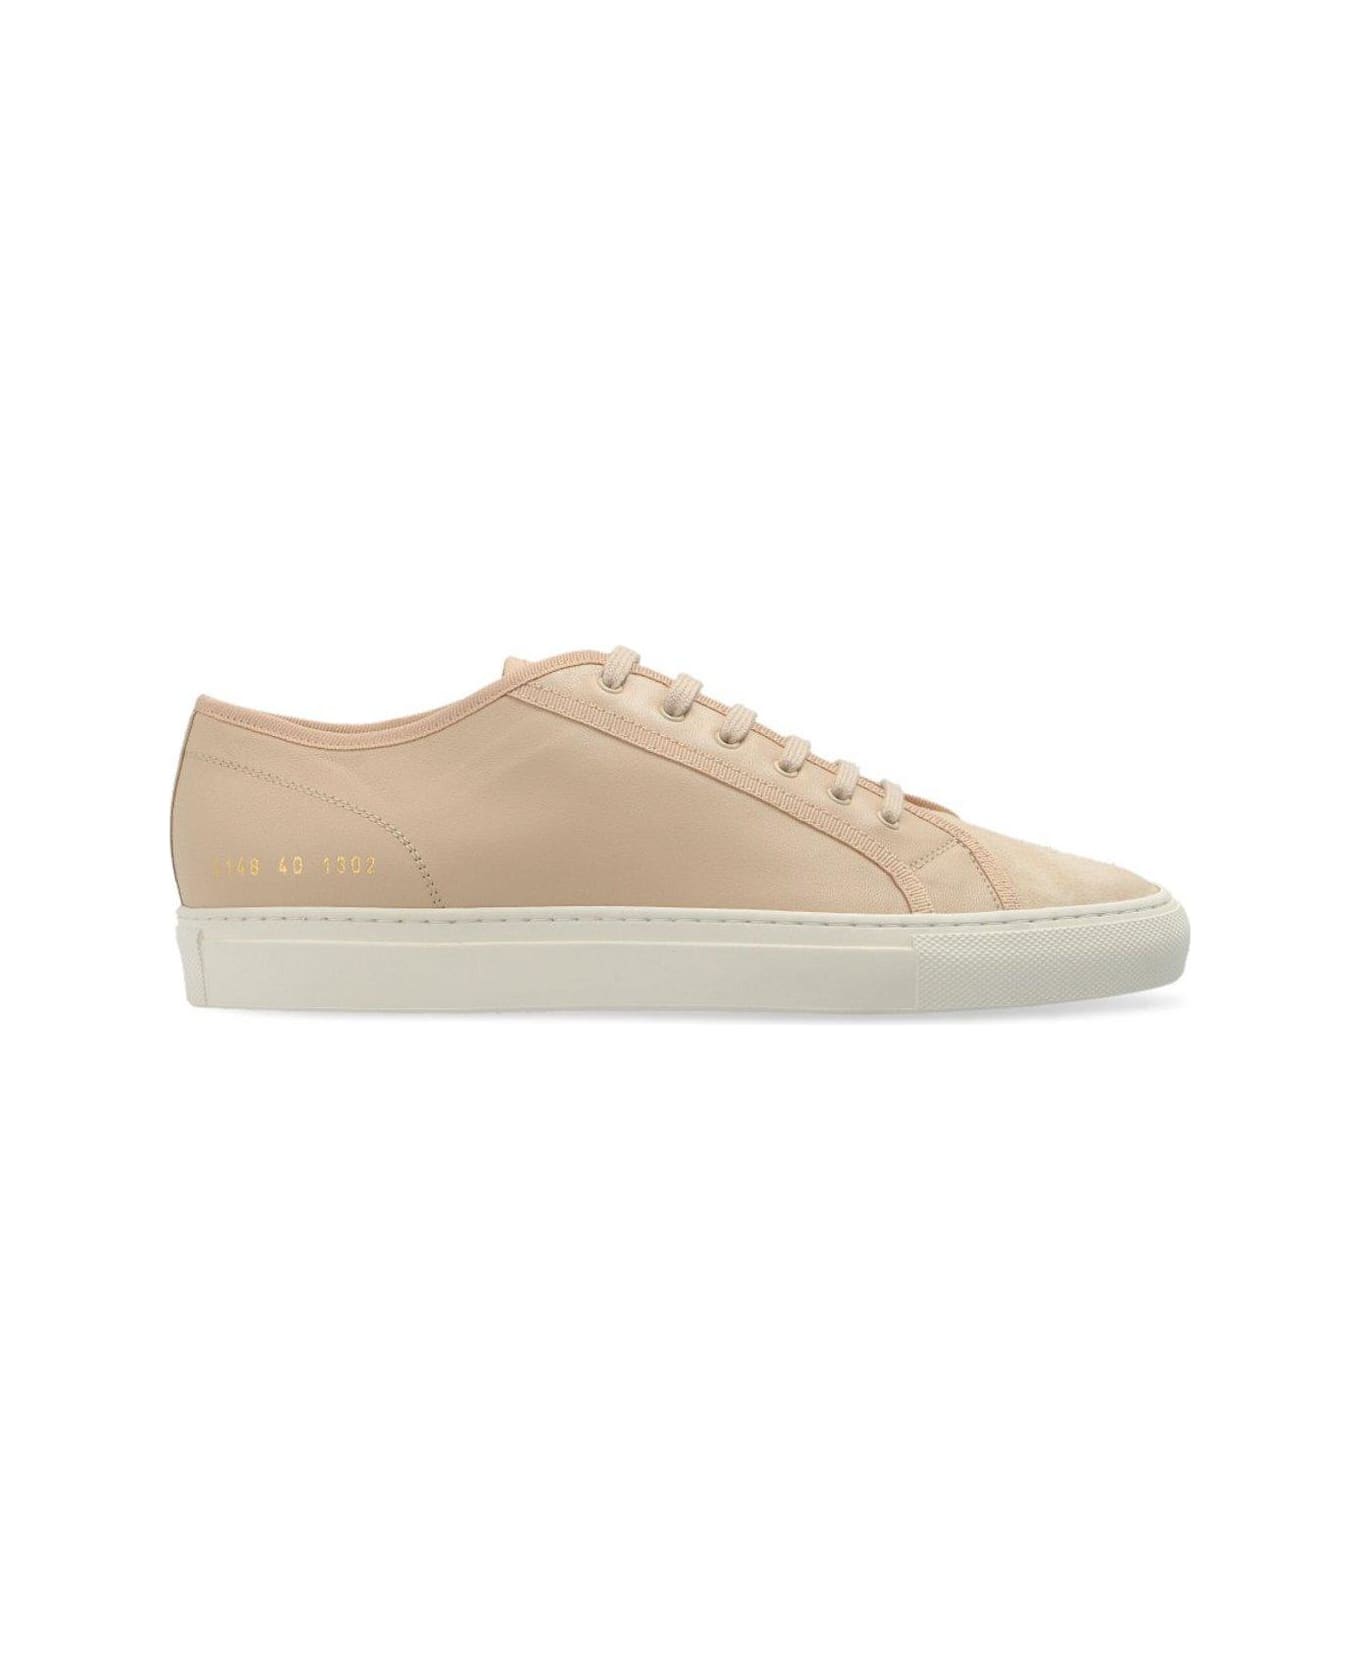 Common Projects Tournament Low-top Sneakers - Beige スニーカー